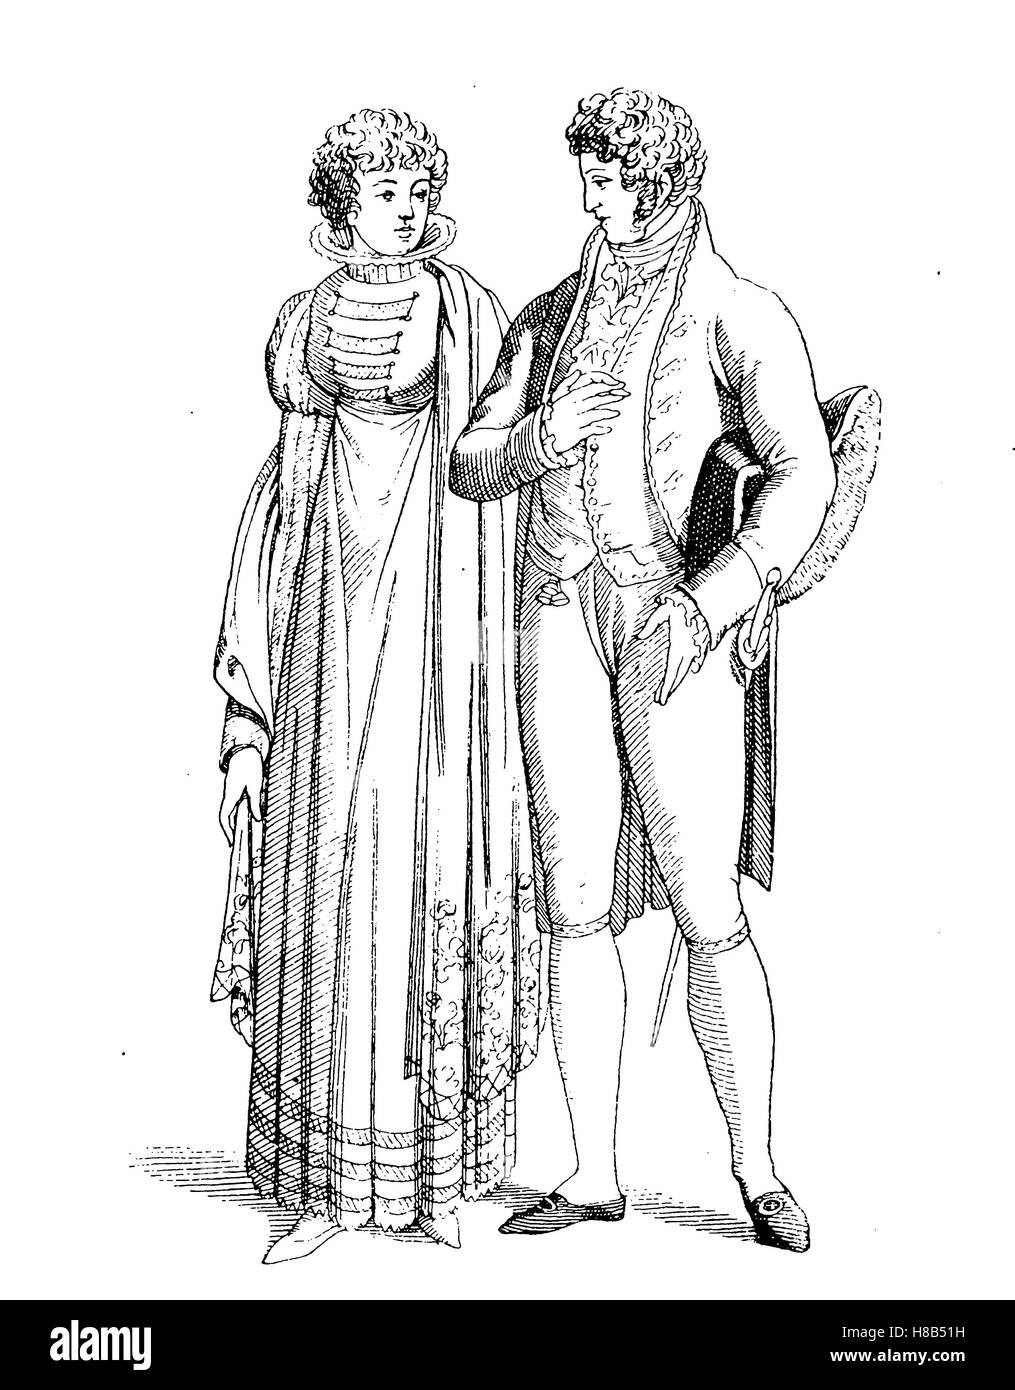 Man and lady, courtly dress of 1810, france, History of fashion, costume story Stock Photo